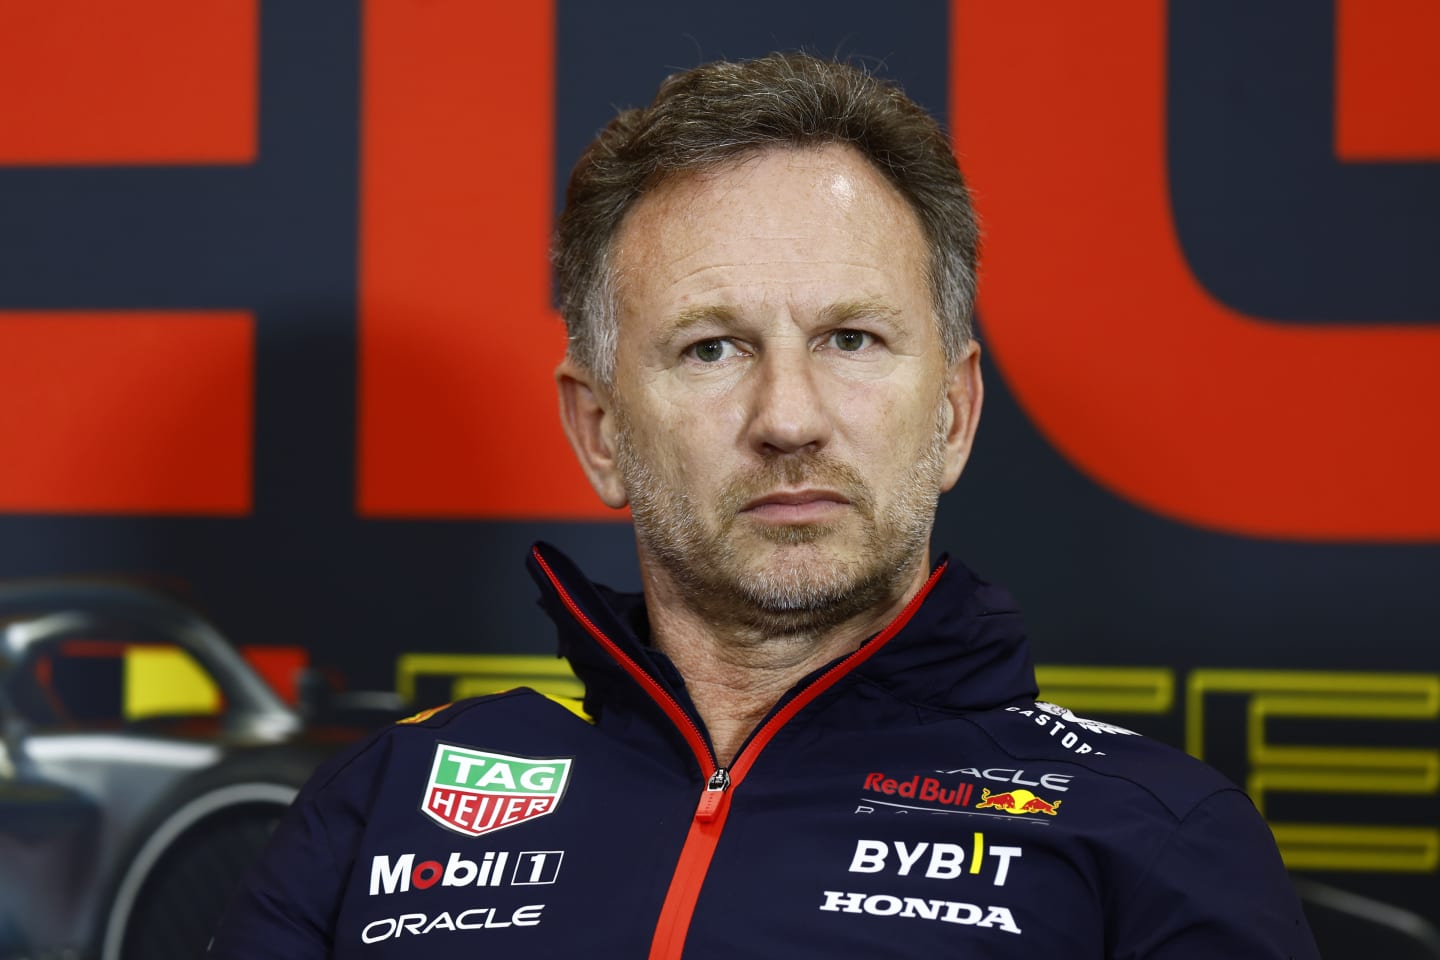 SPA, BELGIUM - JULY 28: Red Bull Racing Team Principal Christian Horner attends the Team Principals Press Conference after practice ahead of the F1 Grand Prix of Belgium at Circuit de Spa-Francorchamps on July 28, 2023 in Spa, Belgium. (Photo by Francois Nel/Getty Images)